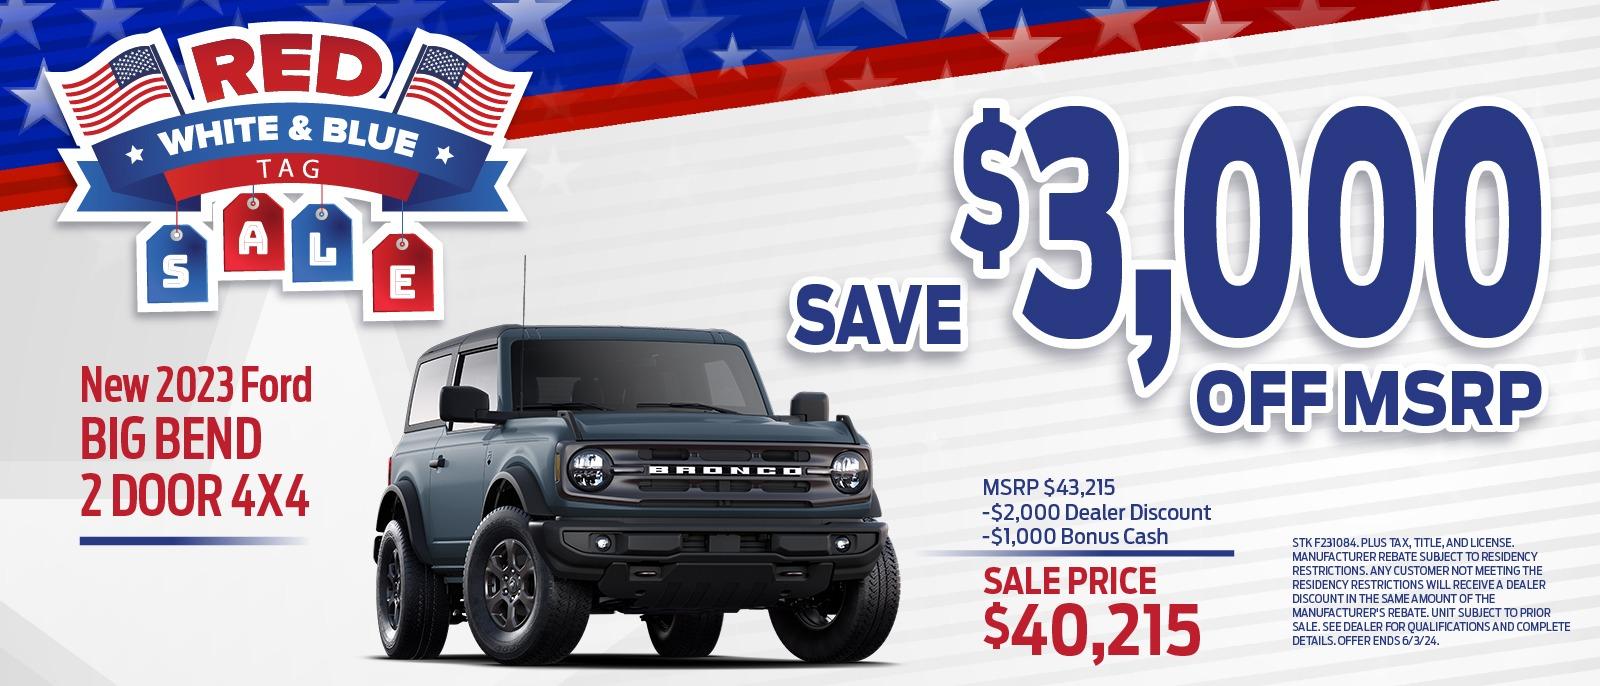 Red White & Blue Tag Sale Bronco Special!🔴⚪🔵